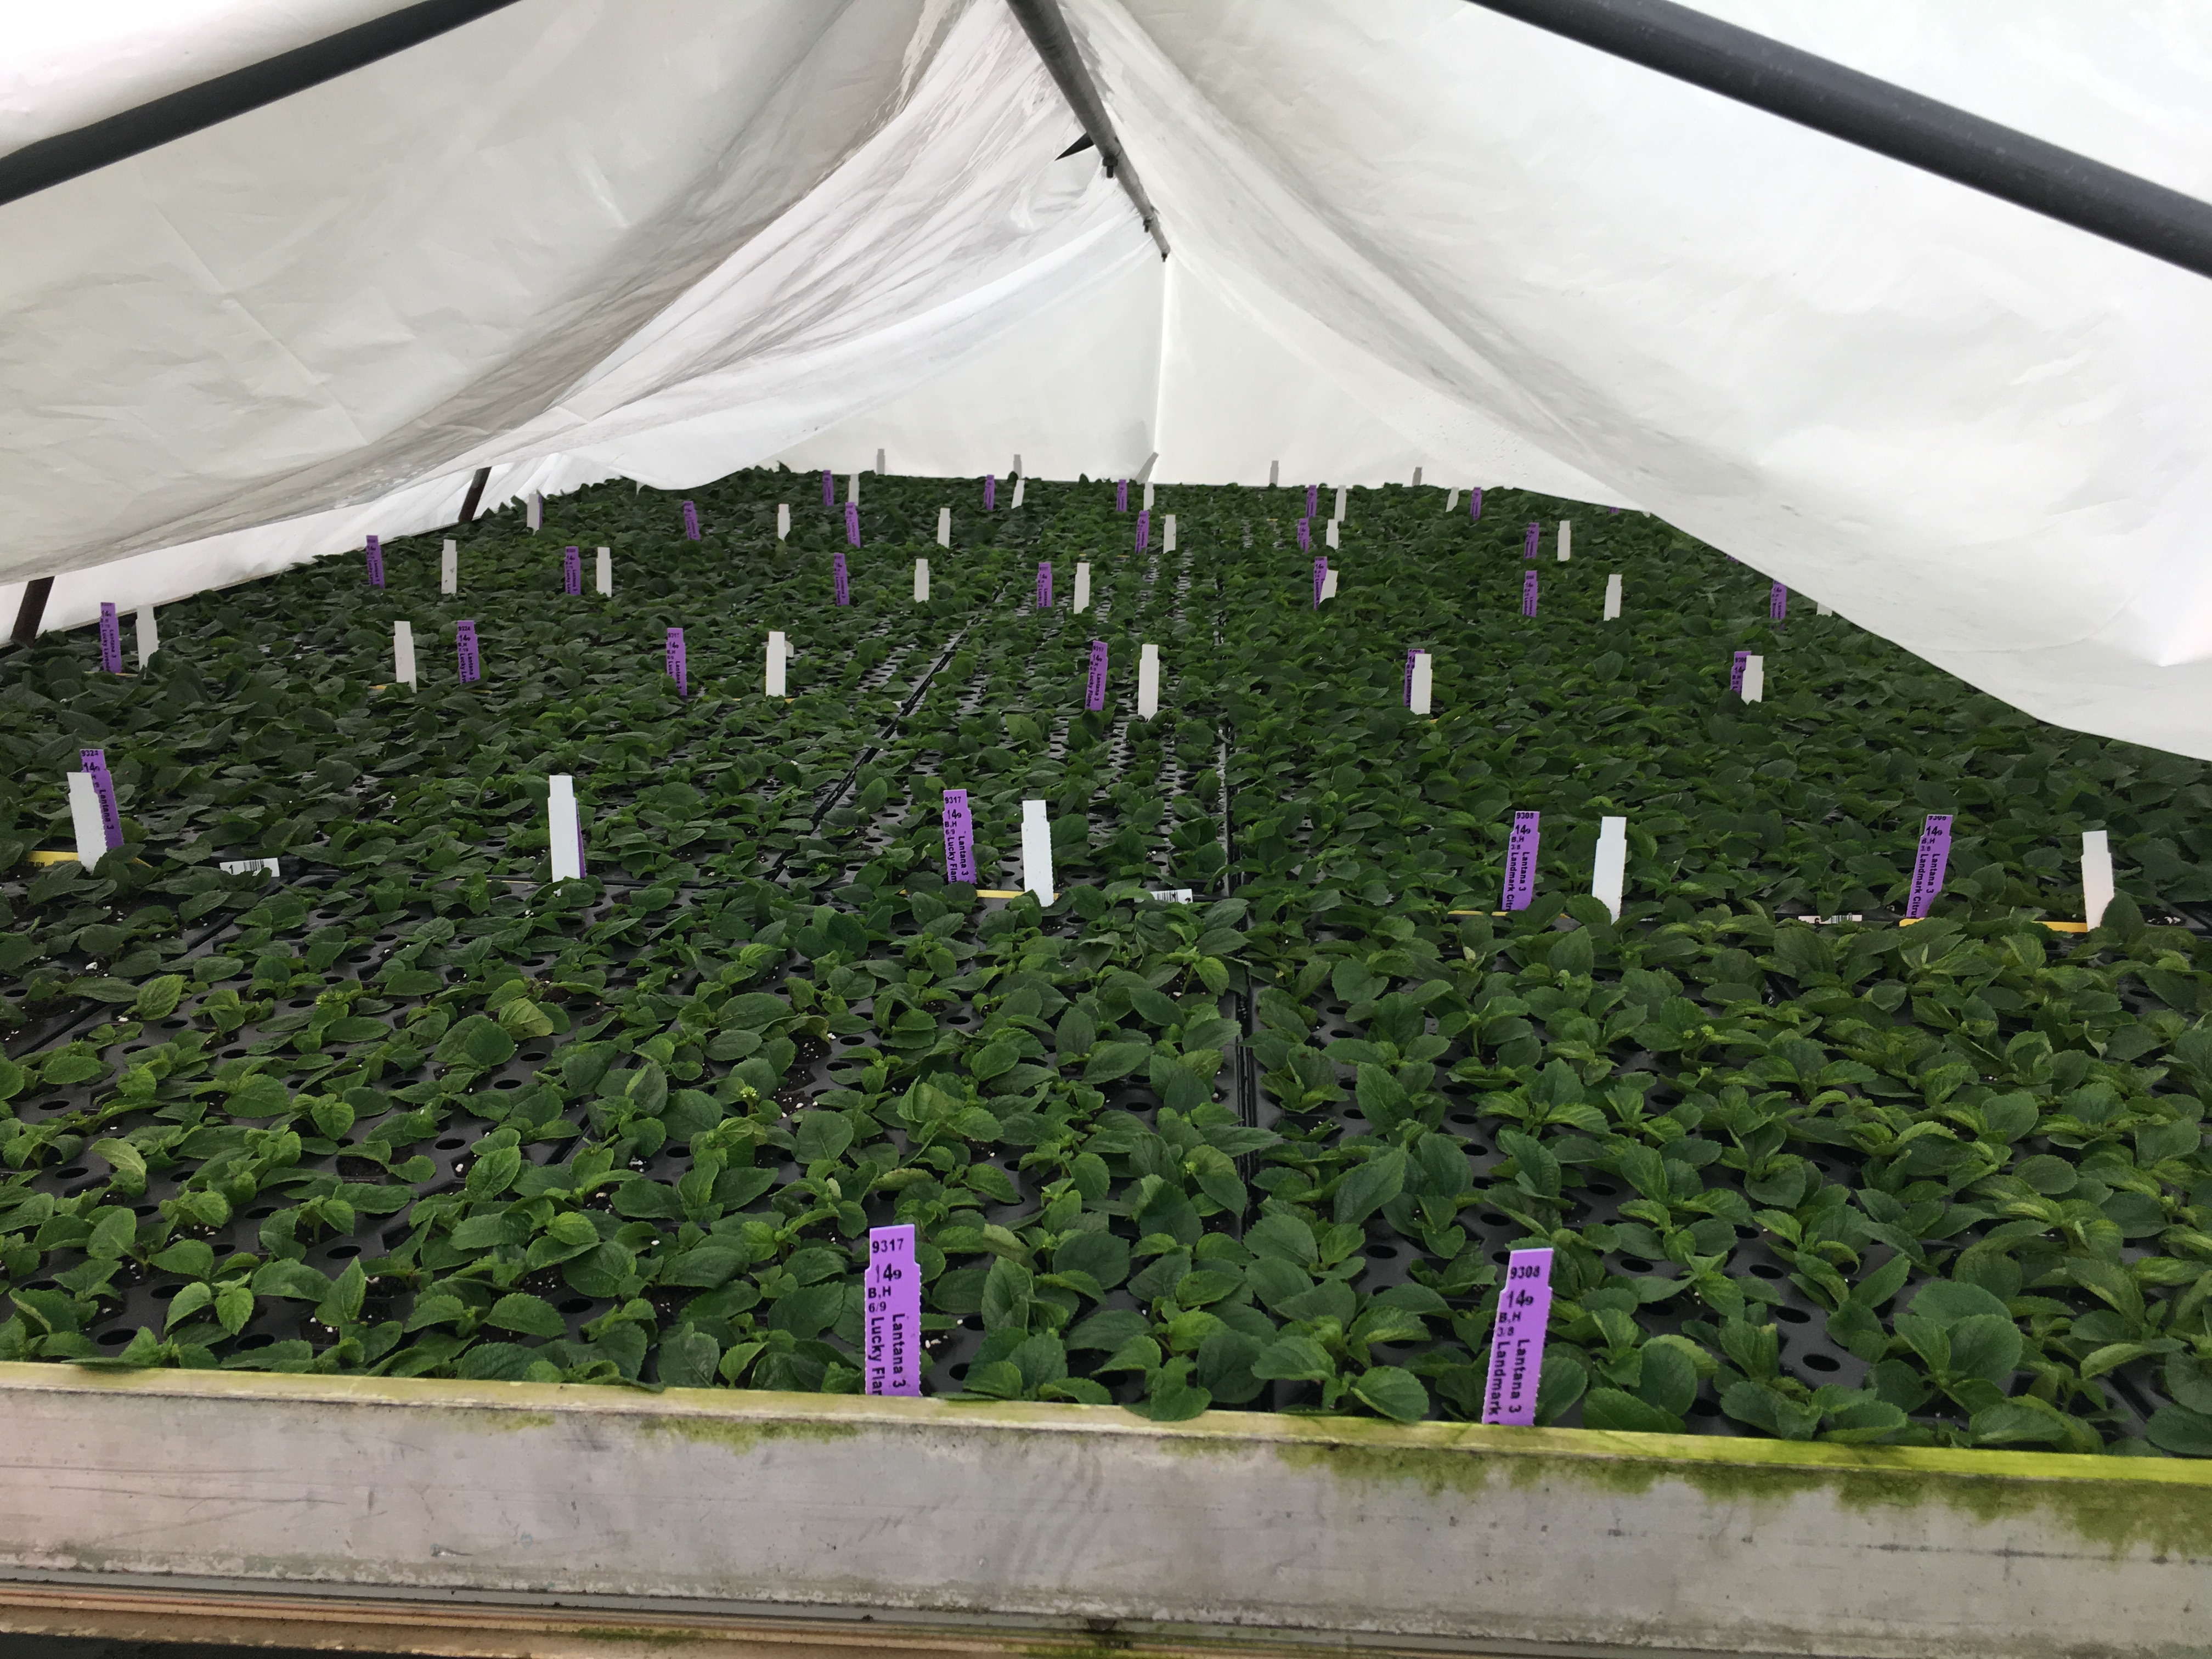 Tent over crops in greenhouse